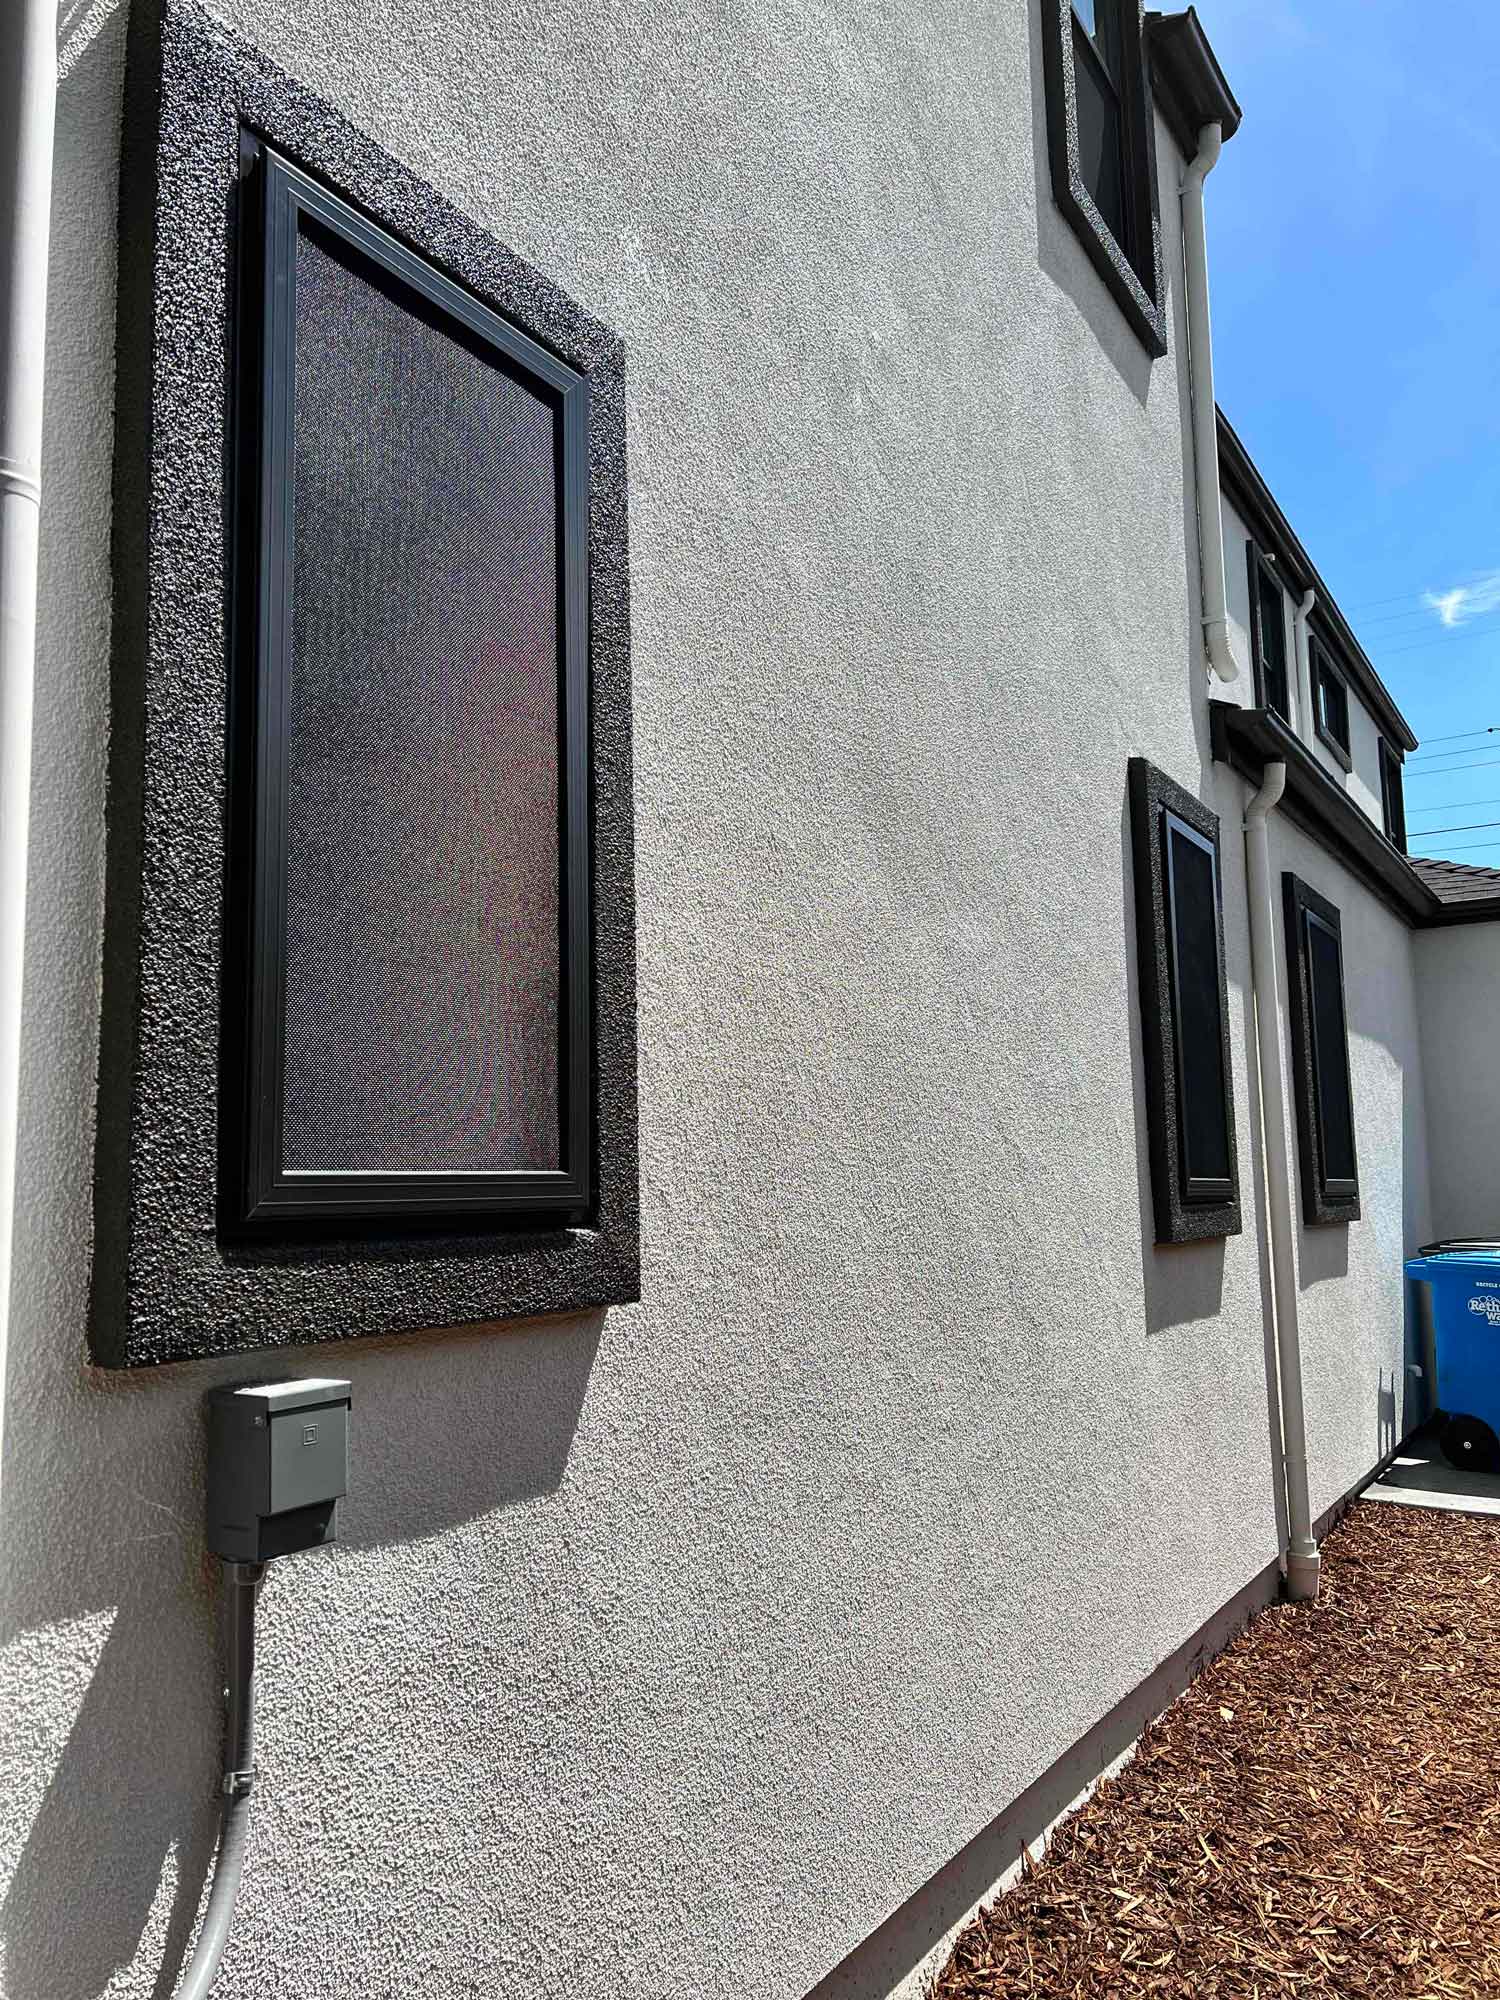 Crimsafe Security Screens are the best on the market for home security. Installed by ClimatePro in Redwood City, CA.